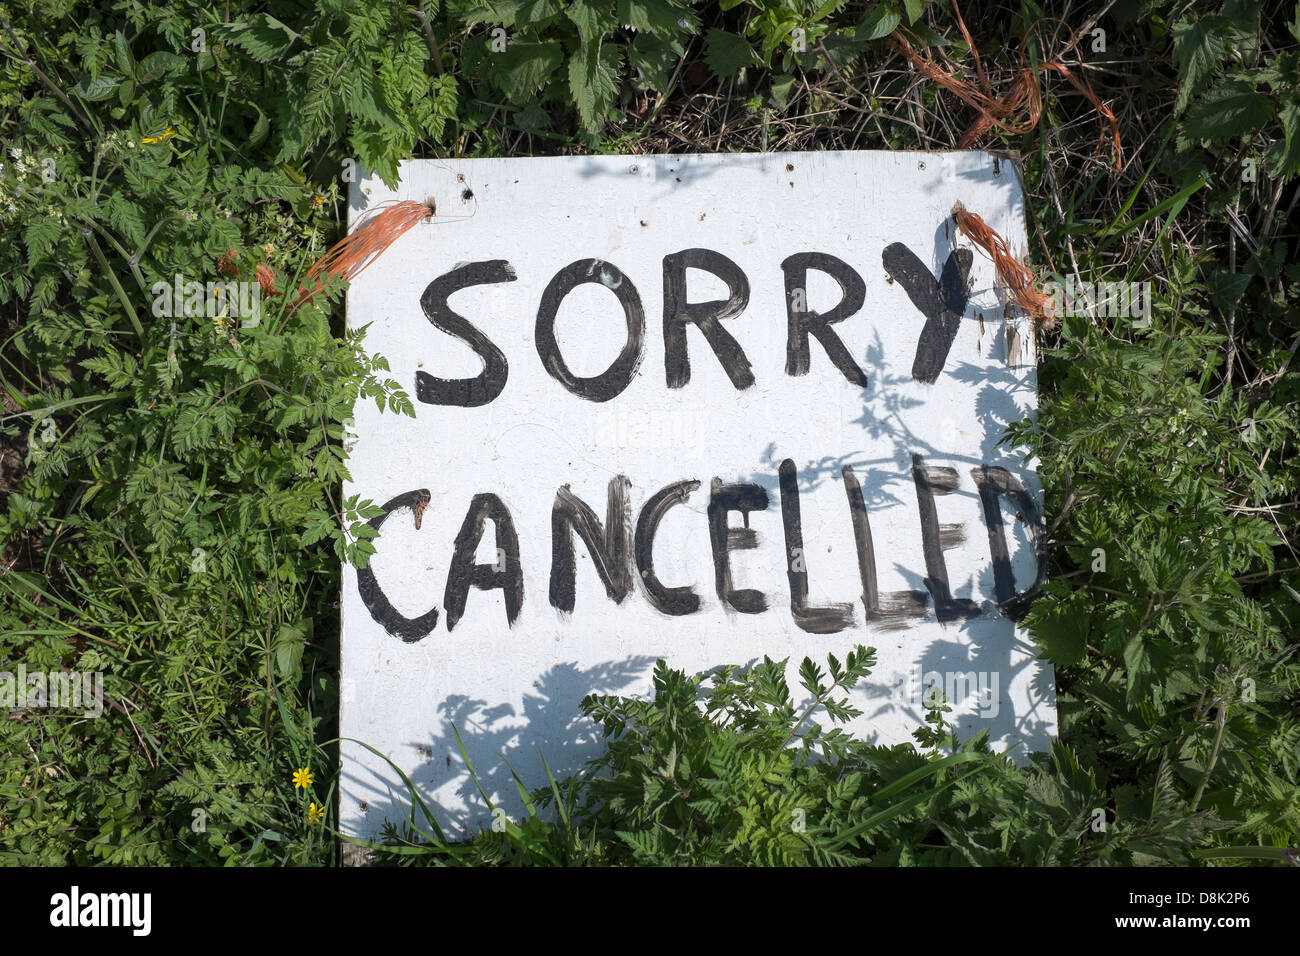 Sorry Cancelled Sign Stock Photo